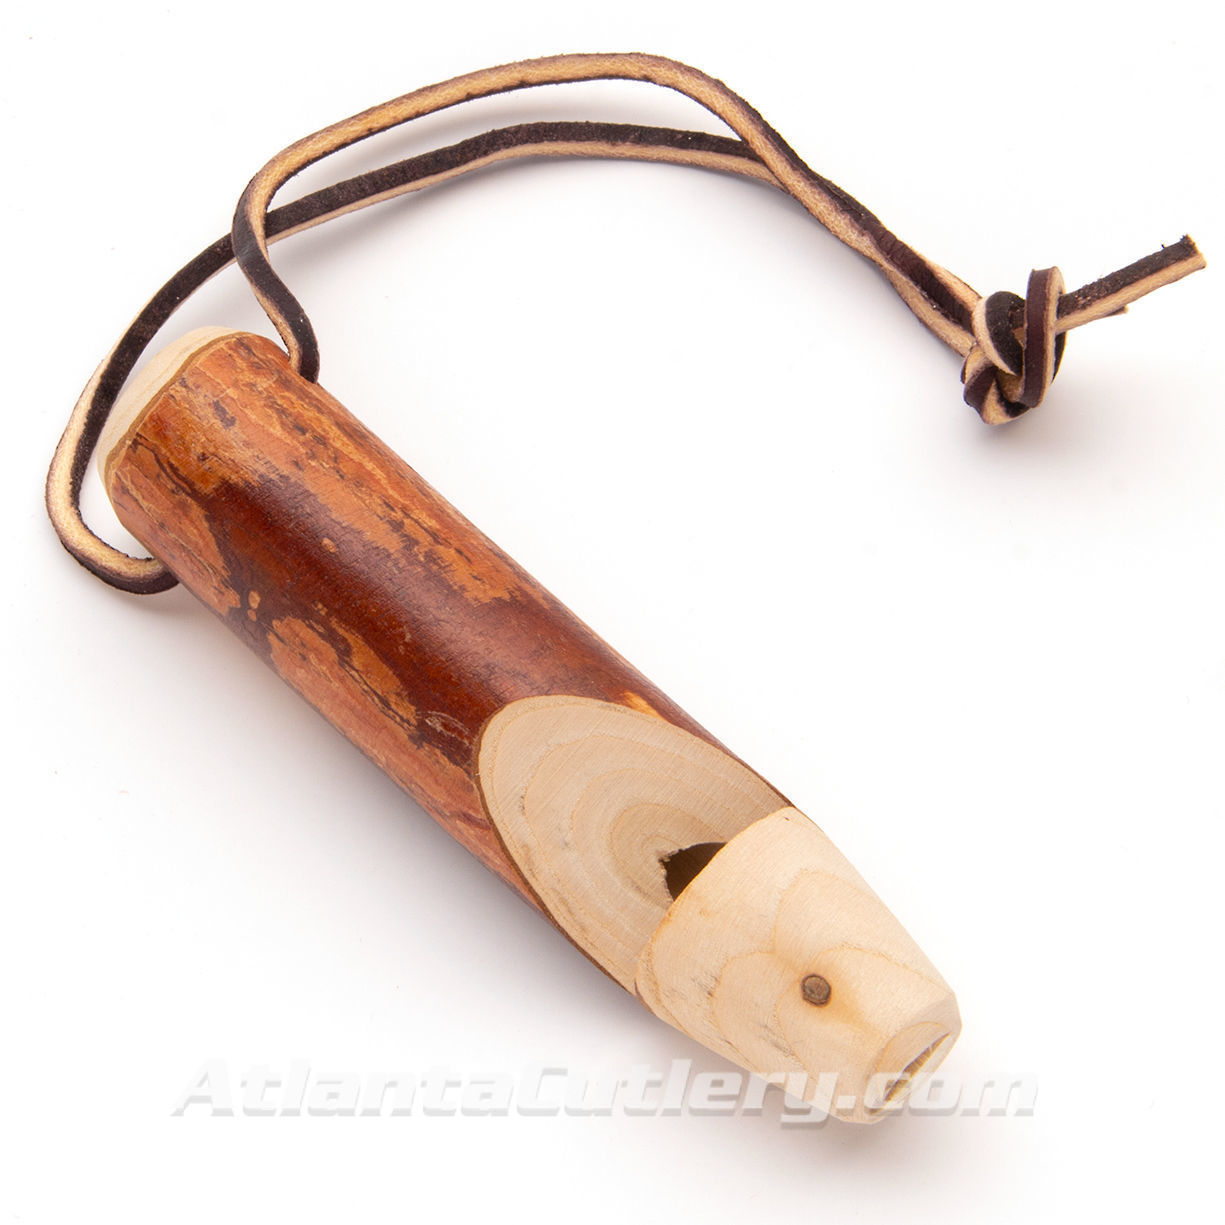 Whistle Creek Sassafras Whistle with Wrist Strap replaces the standard wrist strap on walking staffs and canes